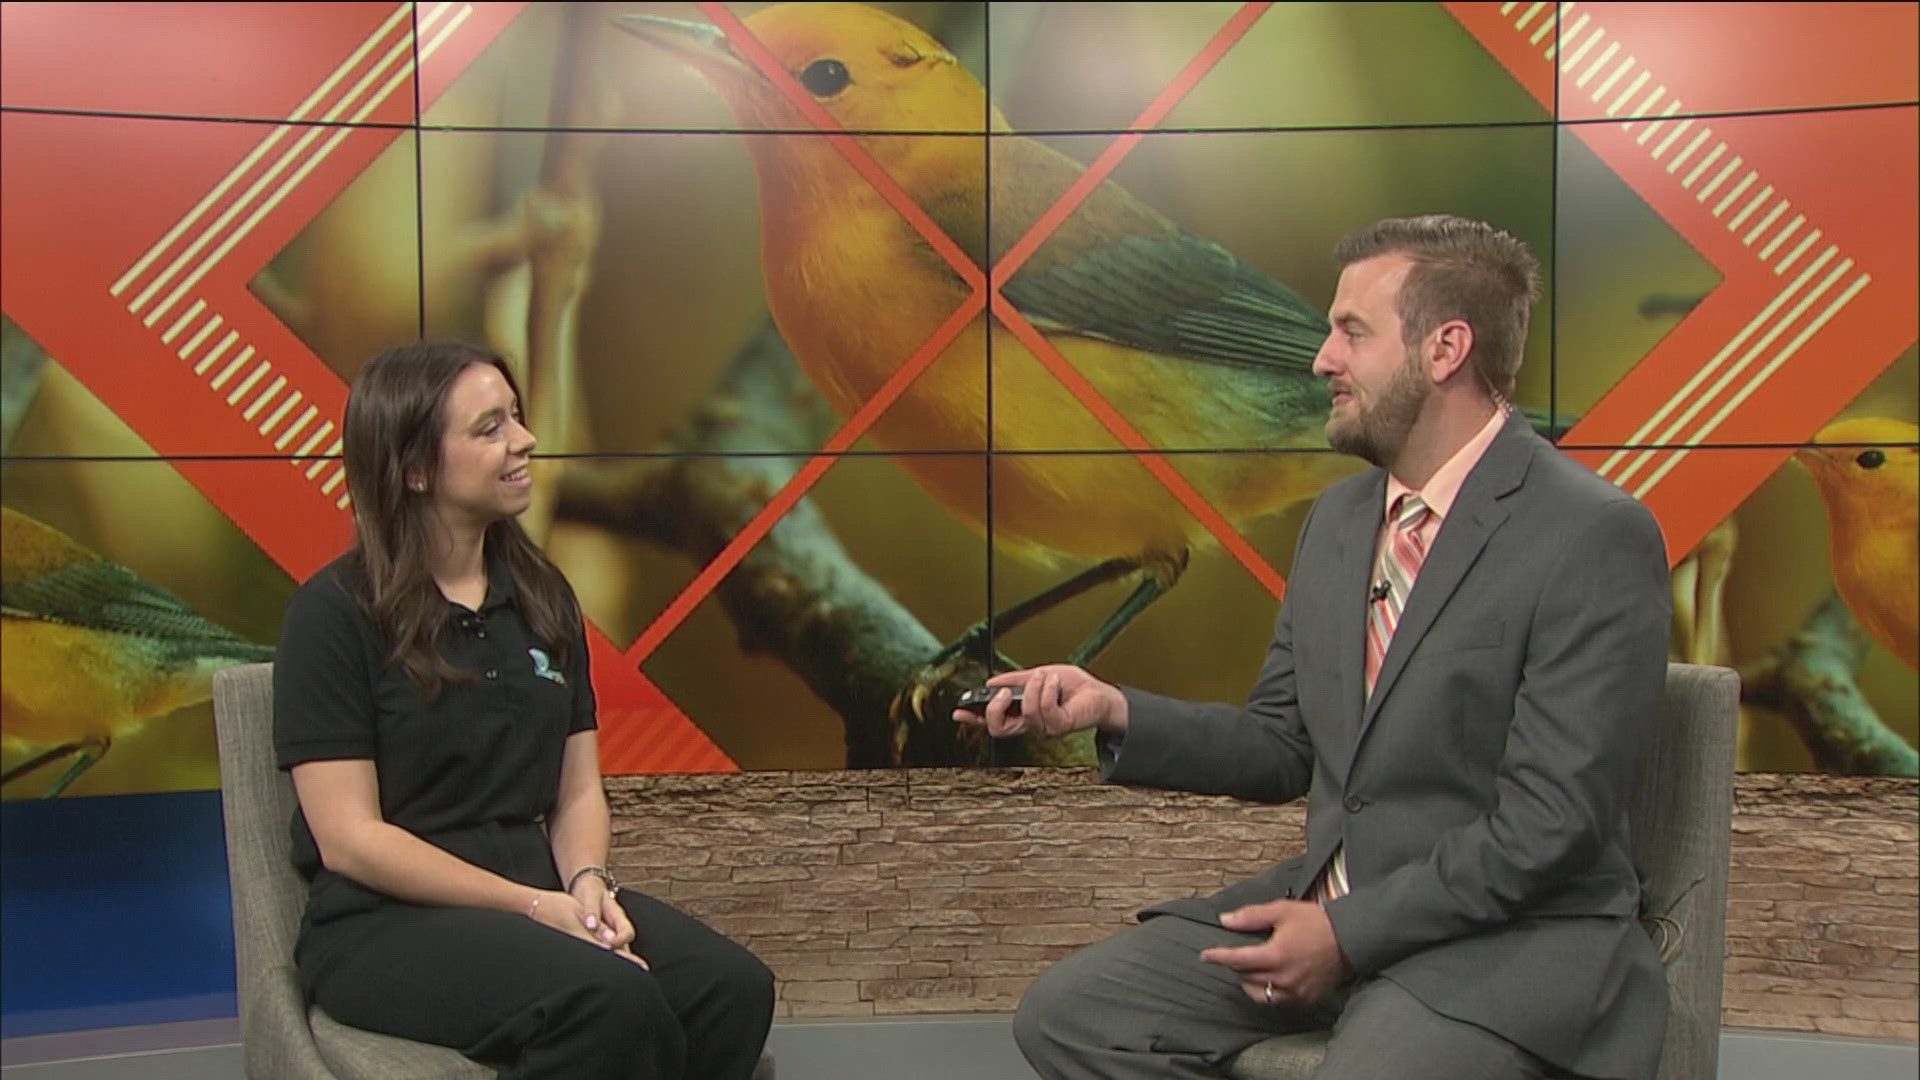 WTOL 11's Jon Monk talks with Sutton Reekes from Imagination Station about the science of birding events this week during the Biggest Week in American Birding.